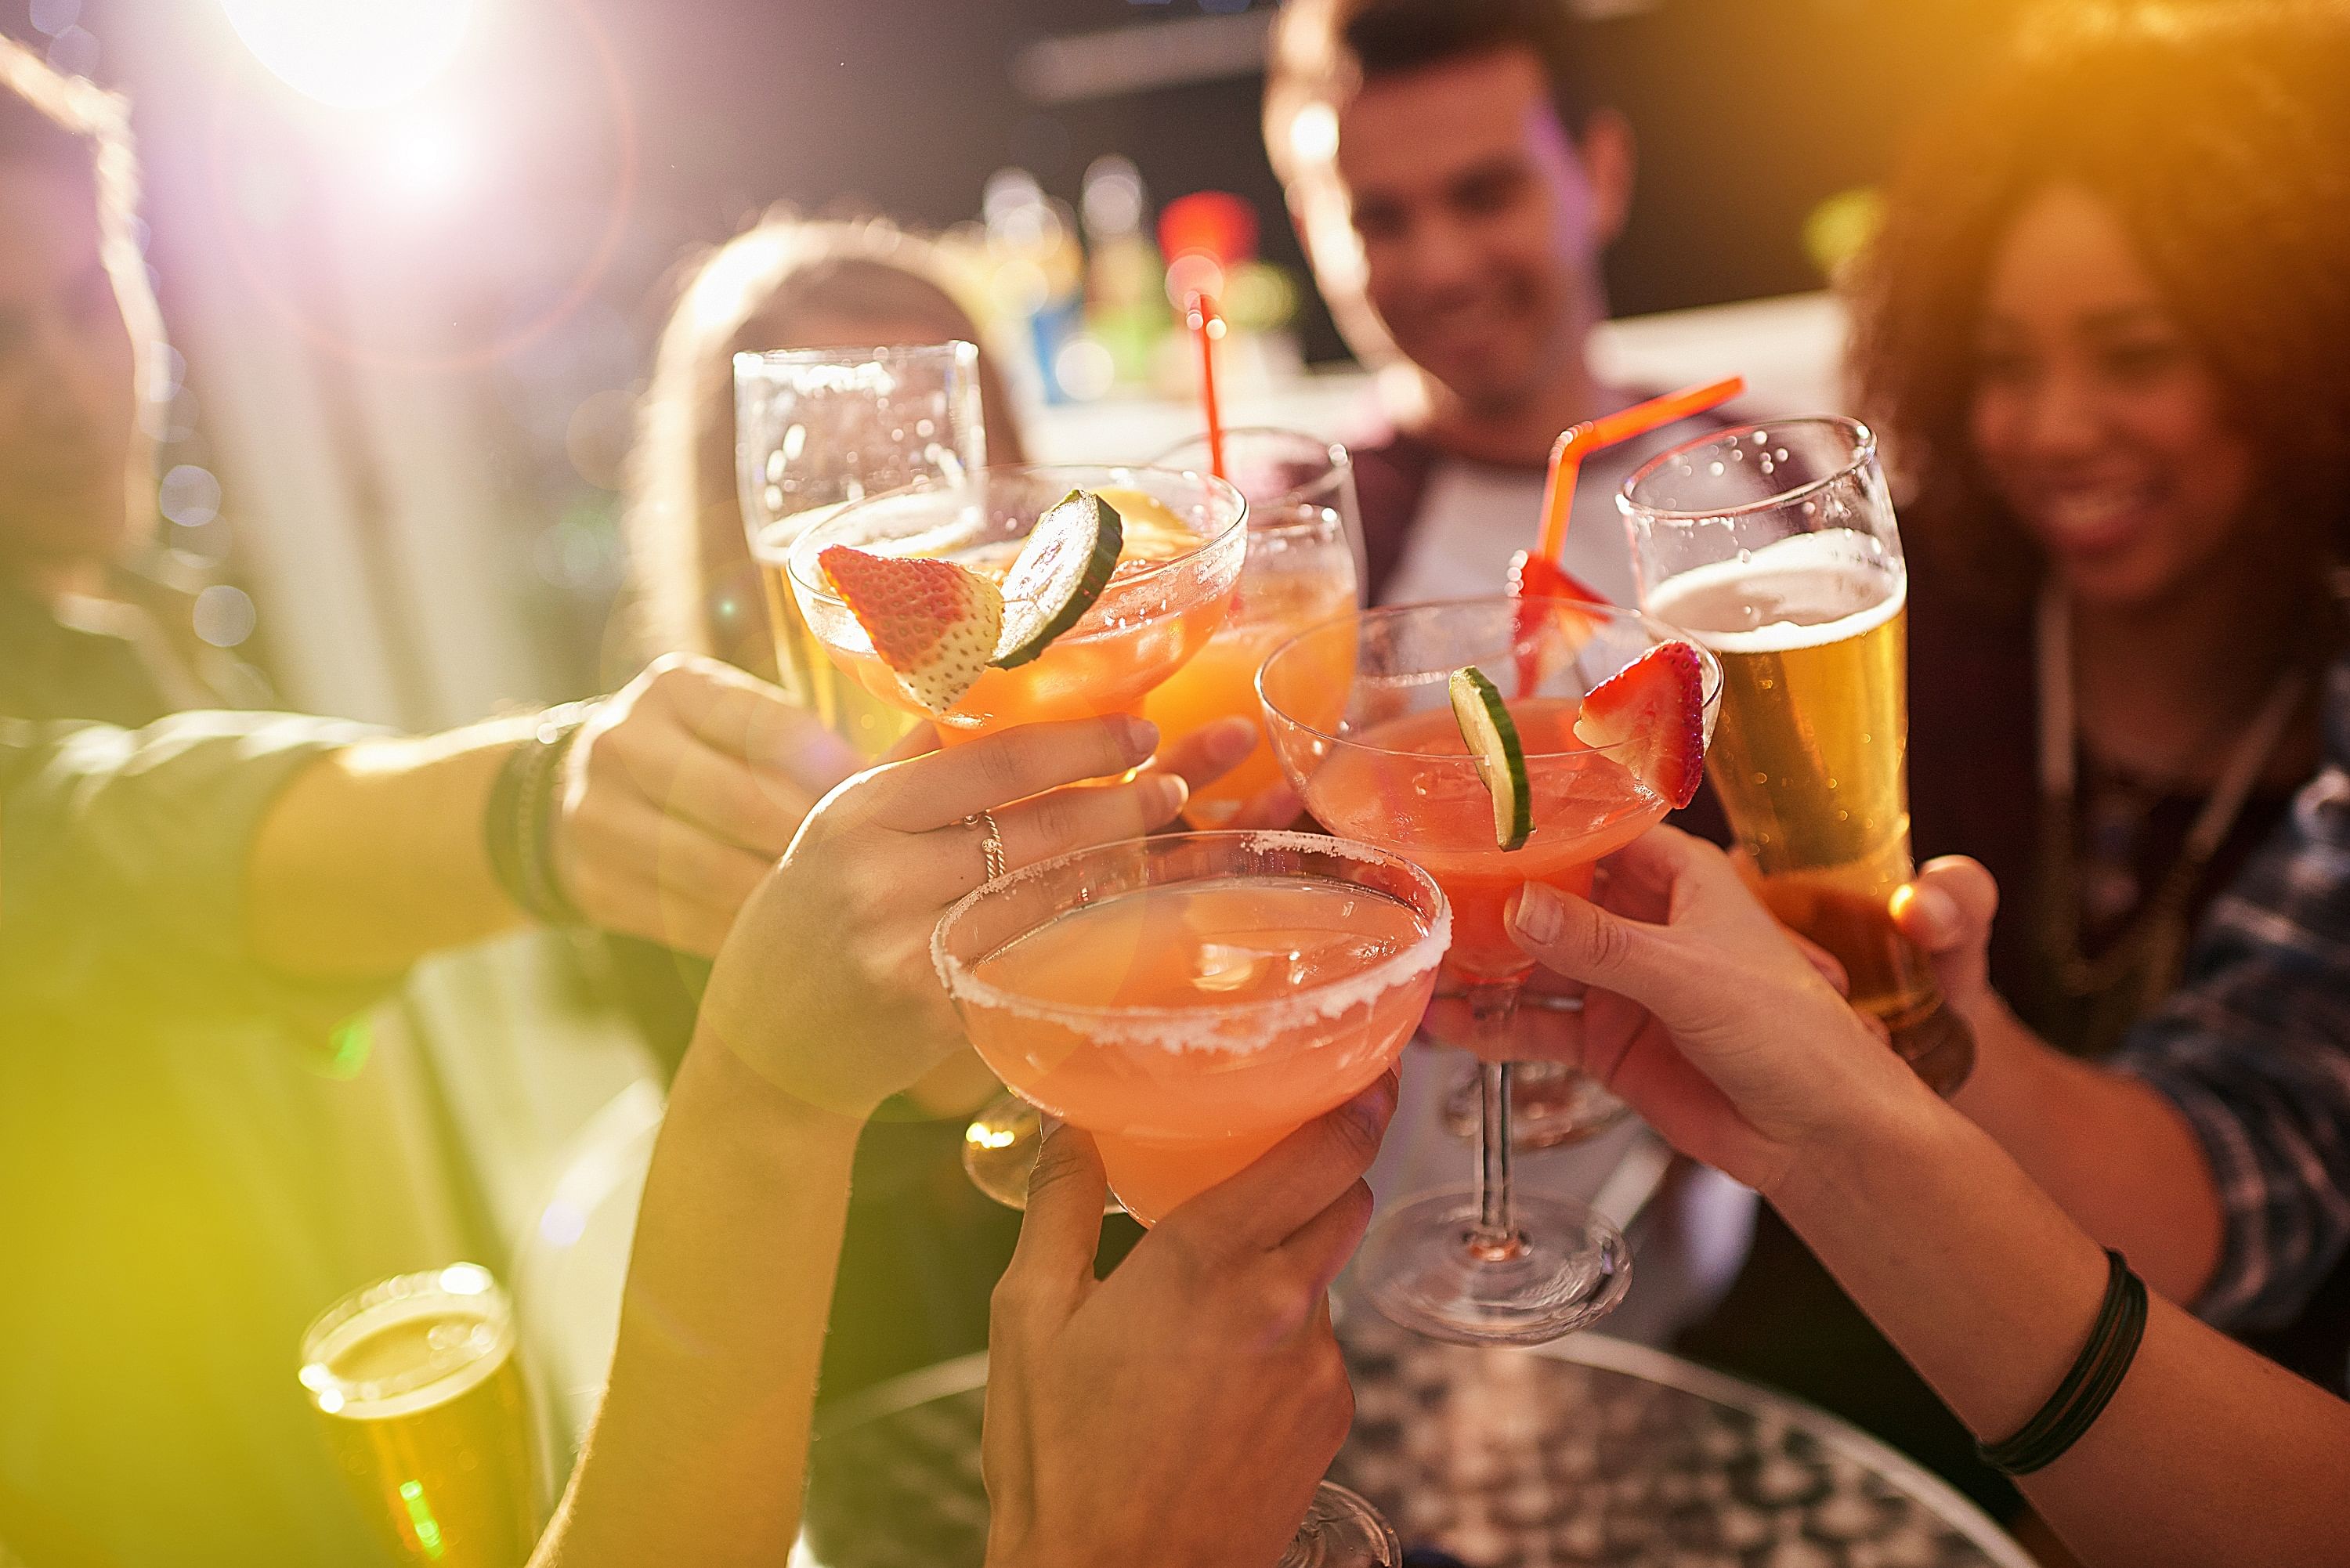 According to WHO, alcohol consumption has come down but people want to try more variety of drinks.